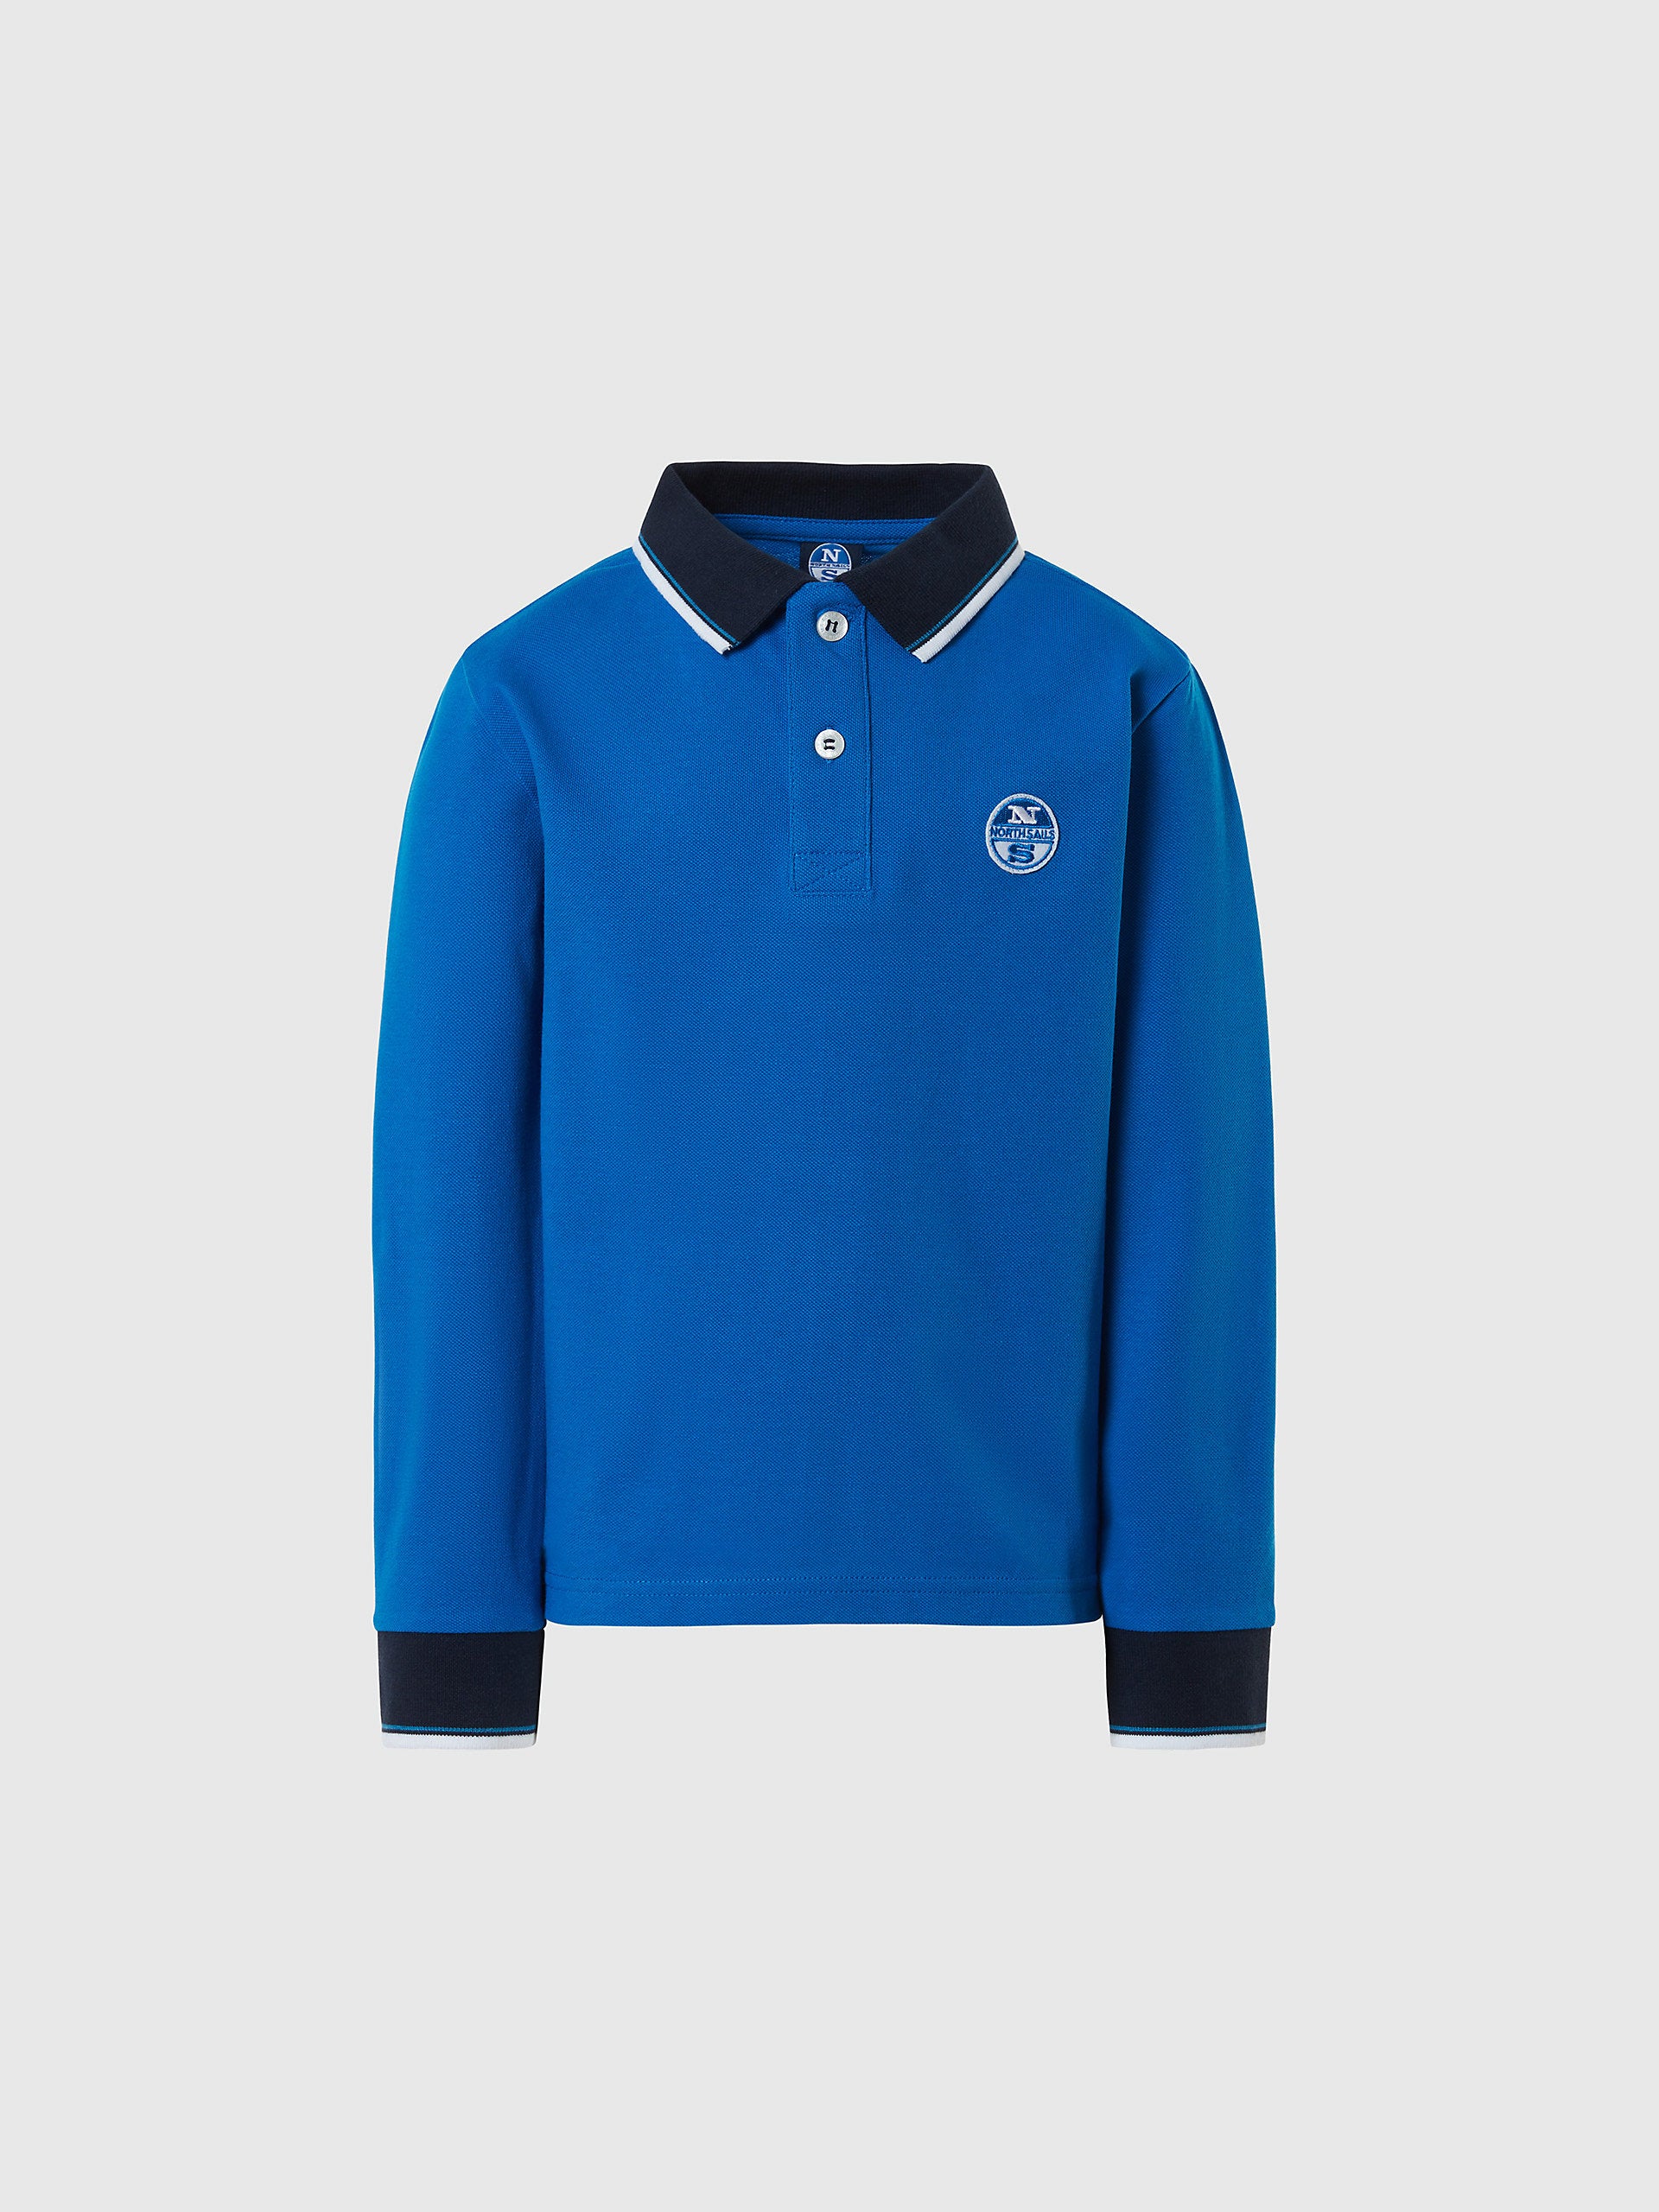 North Sails - Long-sleeved polo shirtNorth SailsImperial blue14